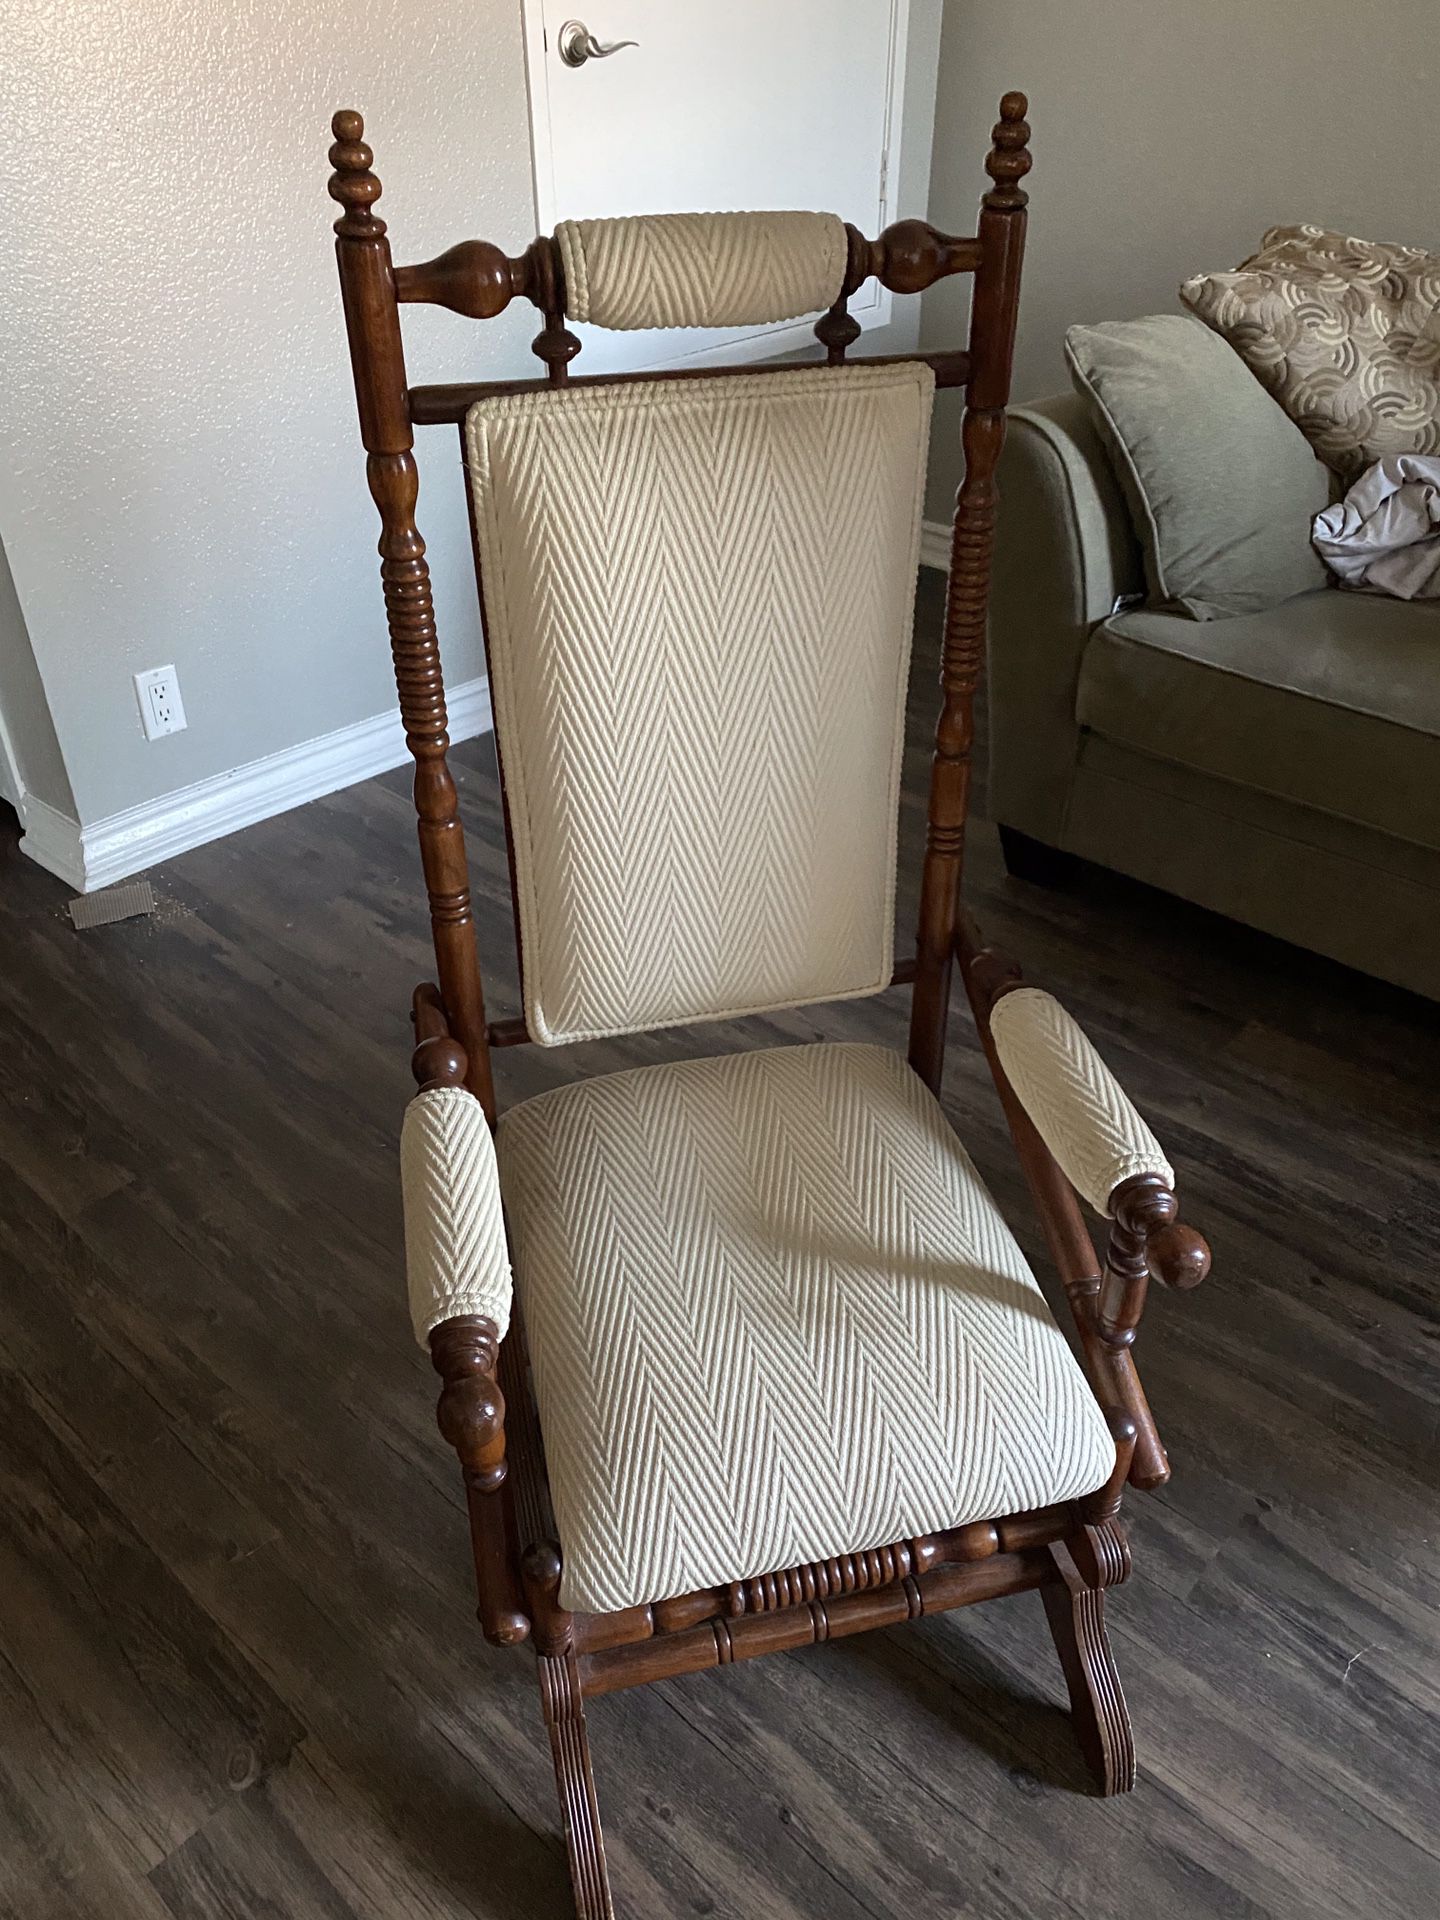 Small antique chair